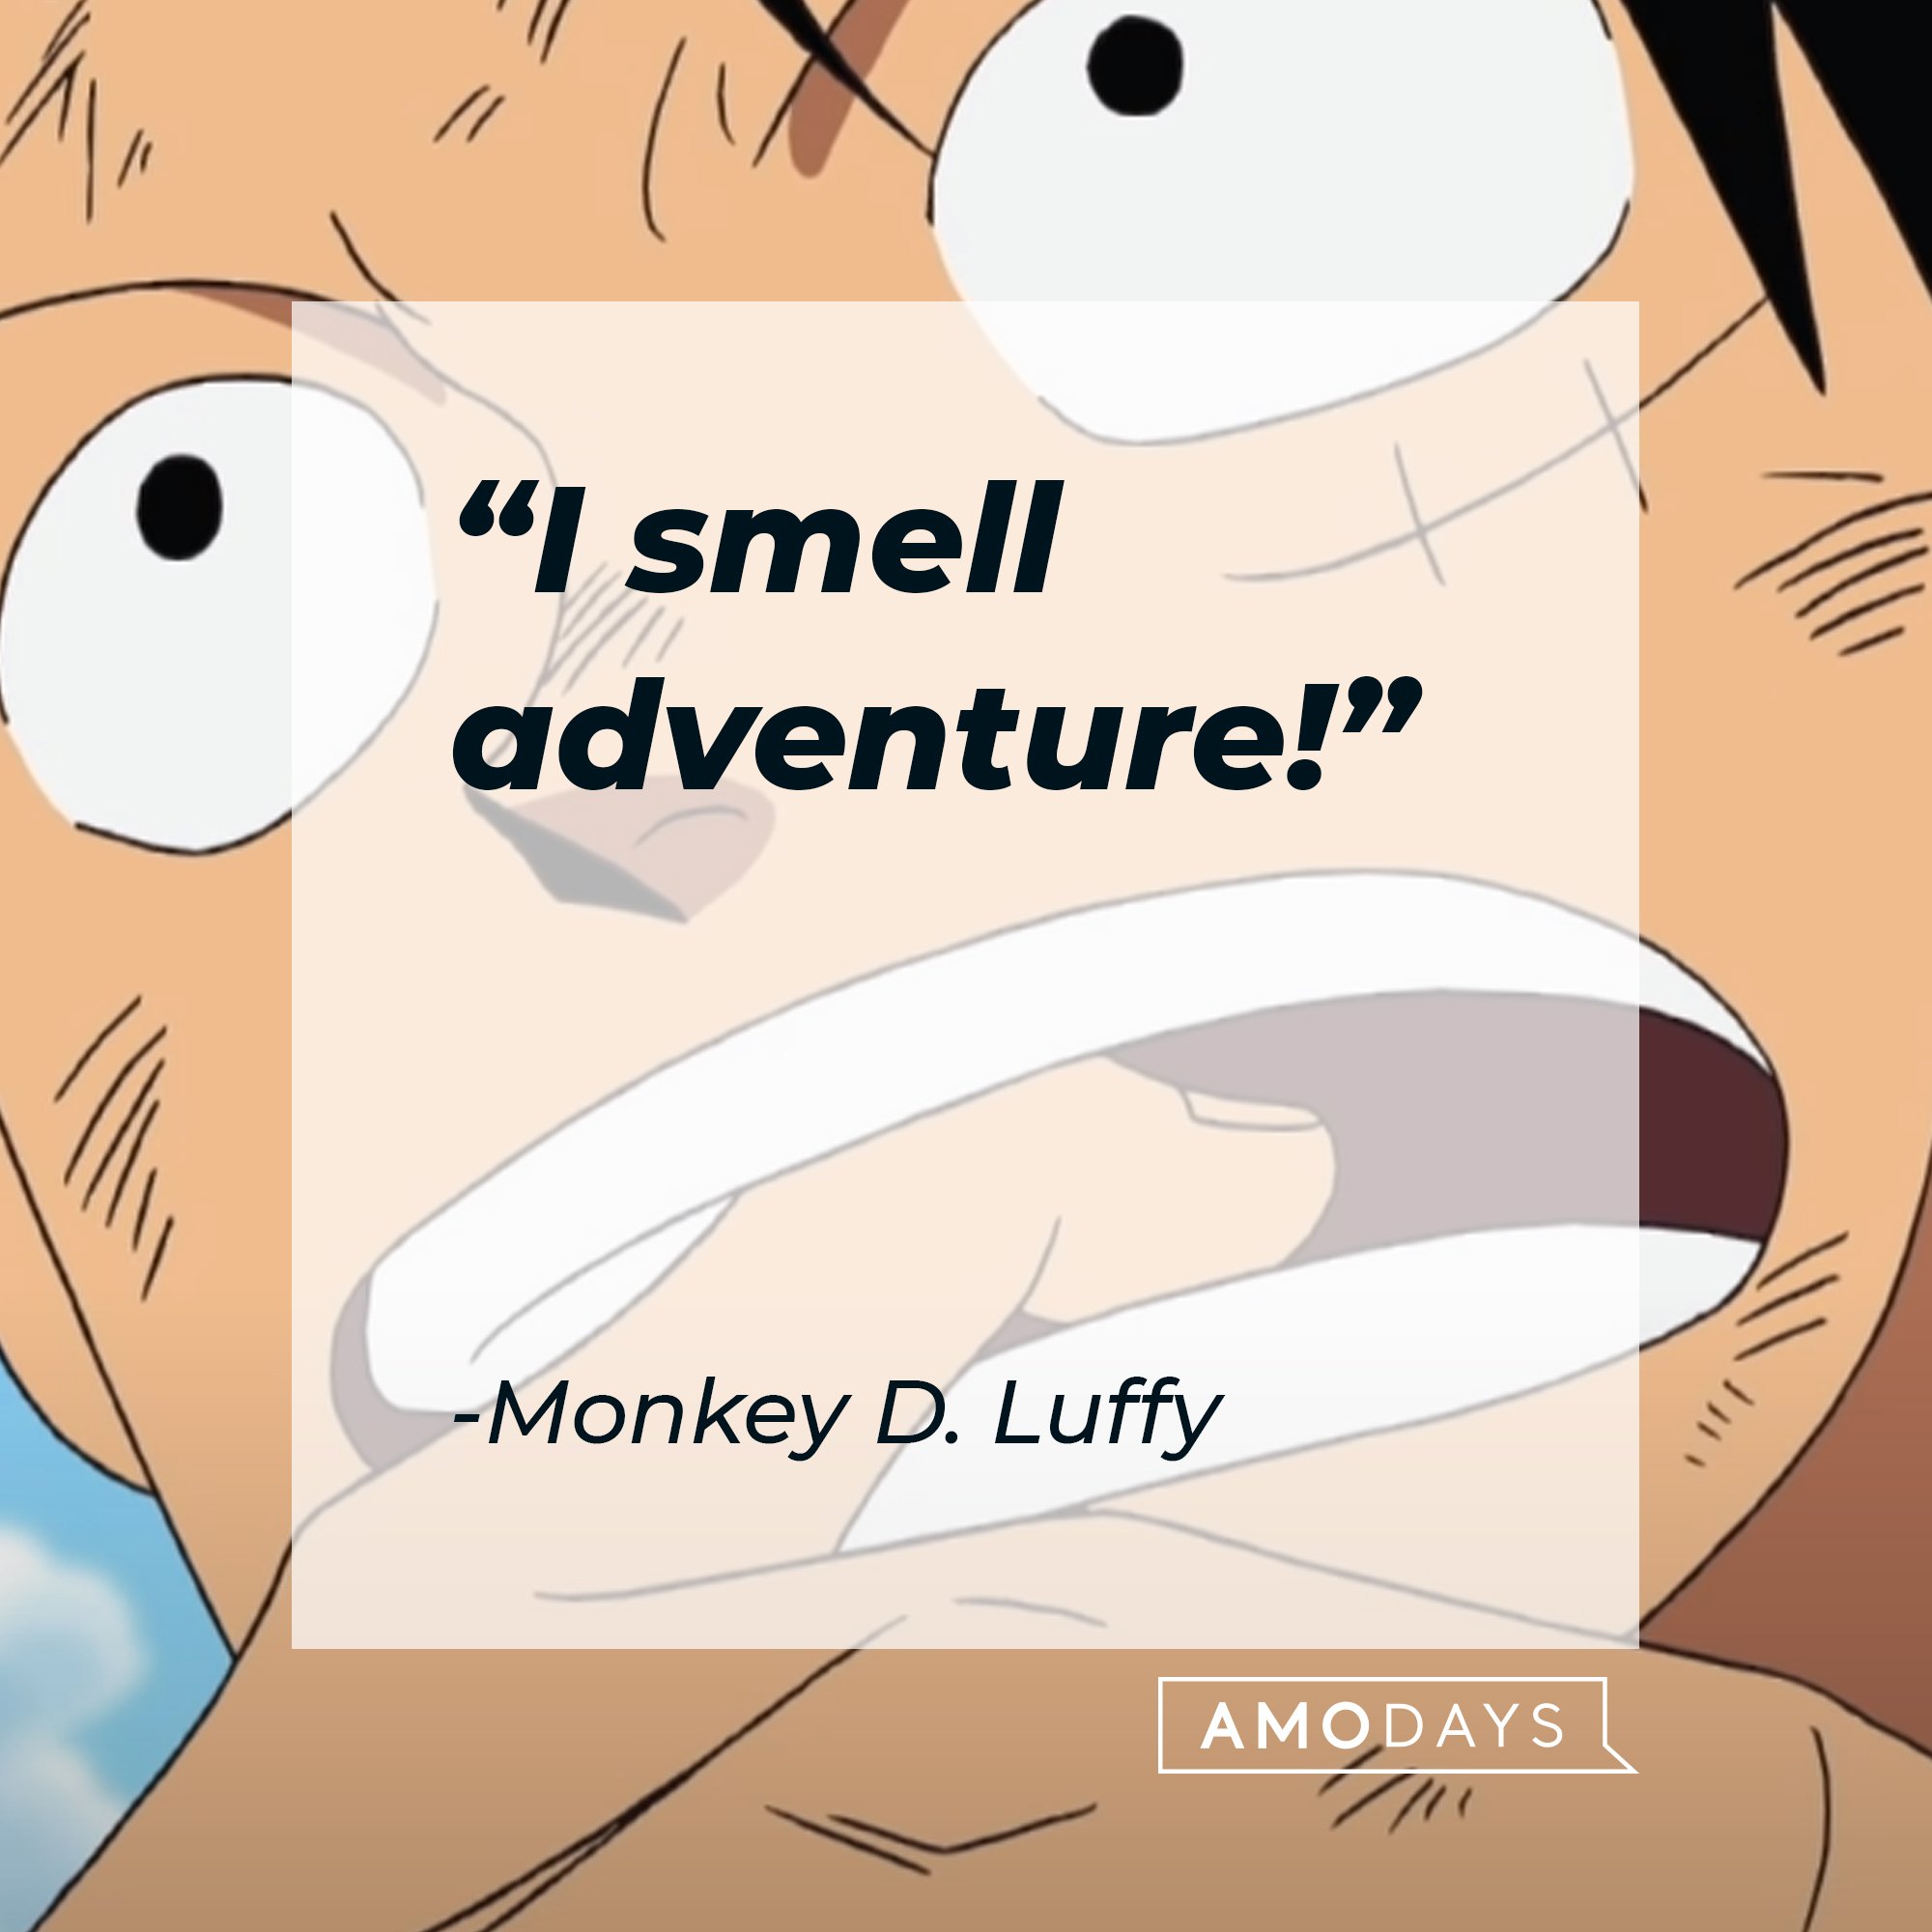 Monkey D. Luffy's quote: "I smell adventure!" |  Image: AmoDays